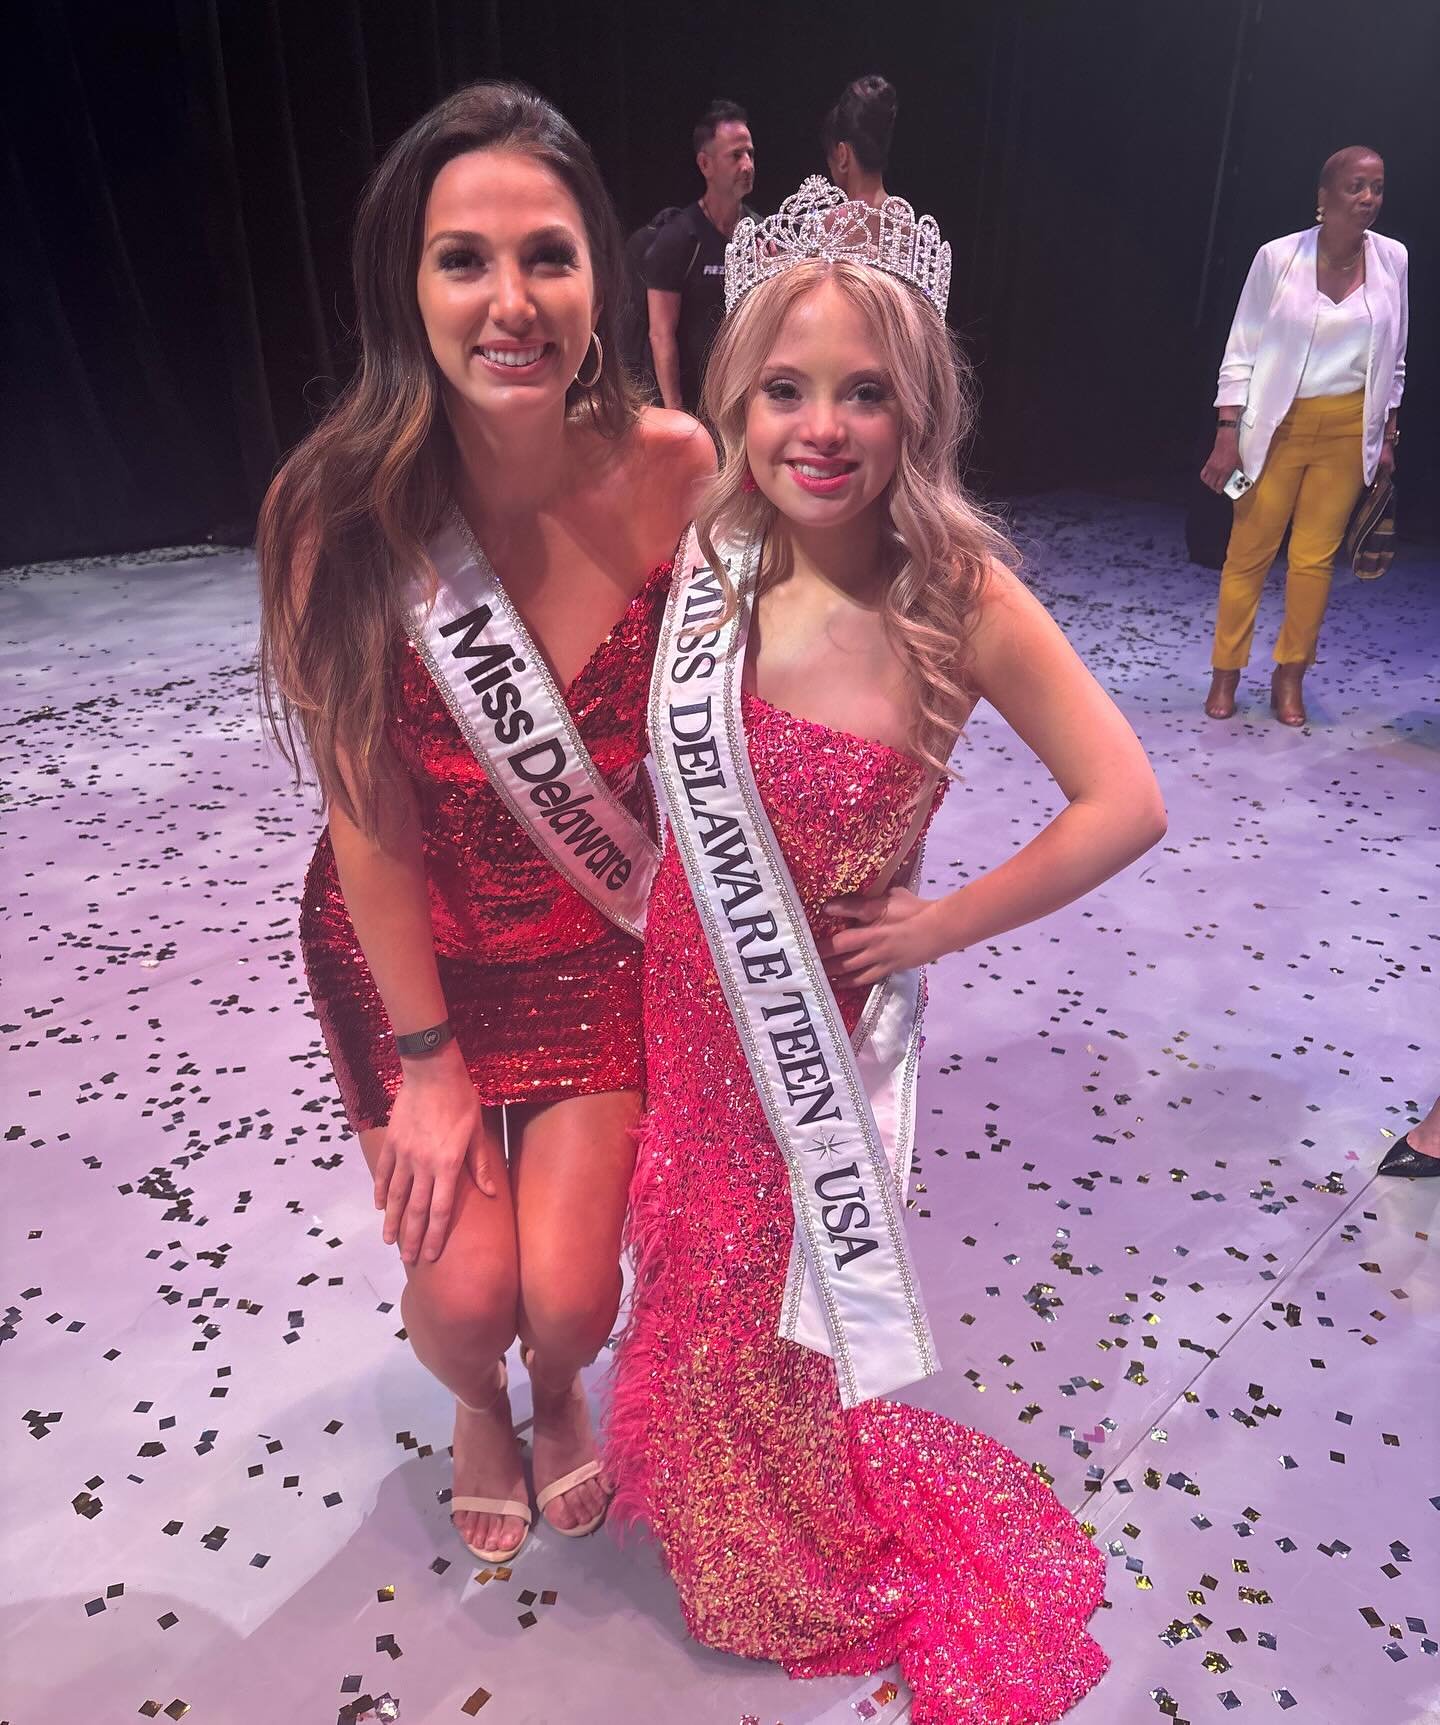 I have been in complete awe of our new @missdeteenusa for over a decade now, and am so proud to see her hard work, kindness, and positivity rewarded!! 

I first met Kayla and her mom in 2014 when I was working at Delia&rsquo;s in the mall, the whole 